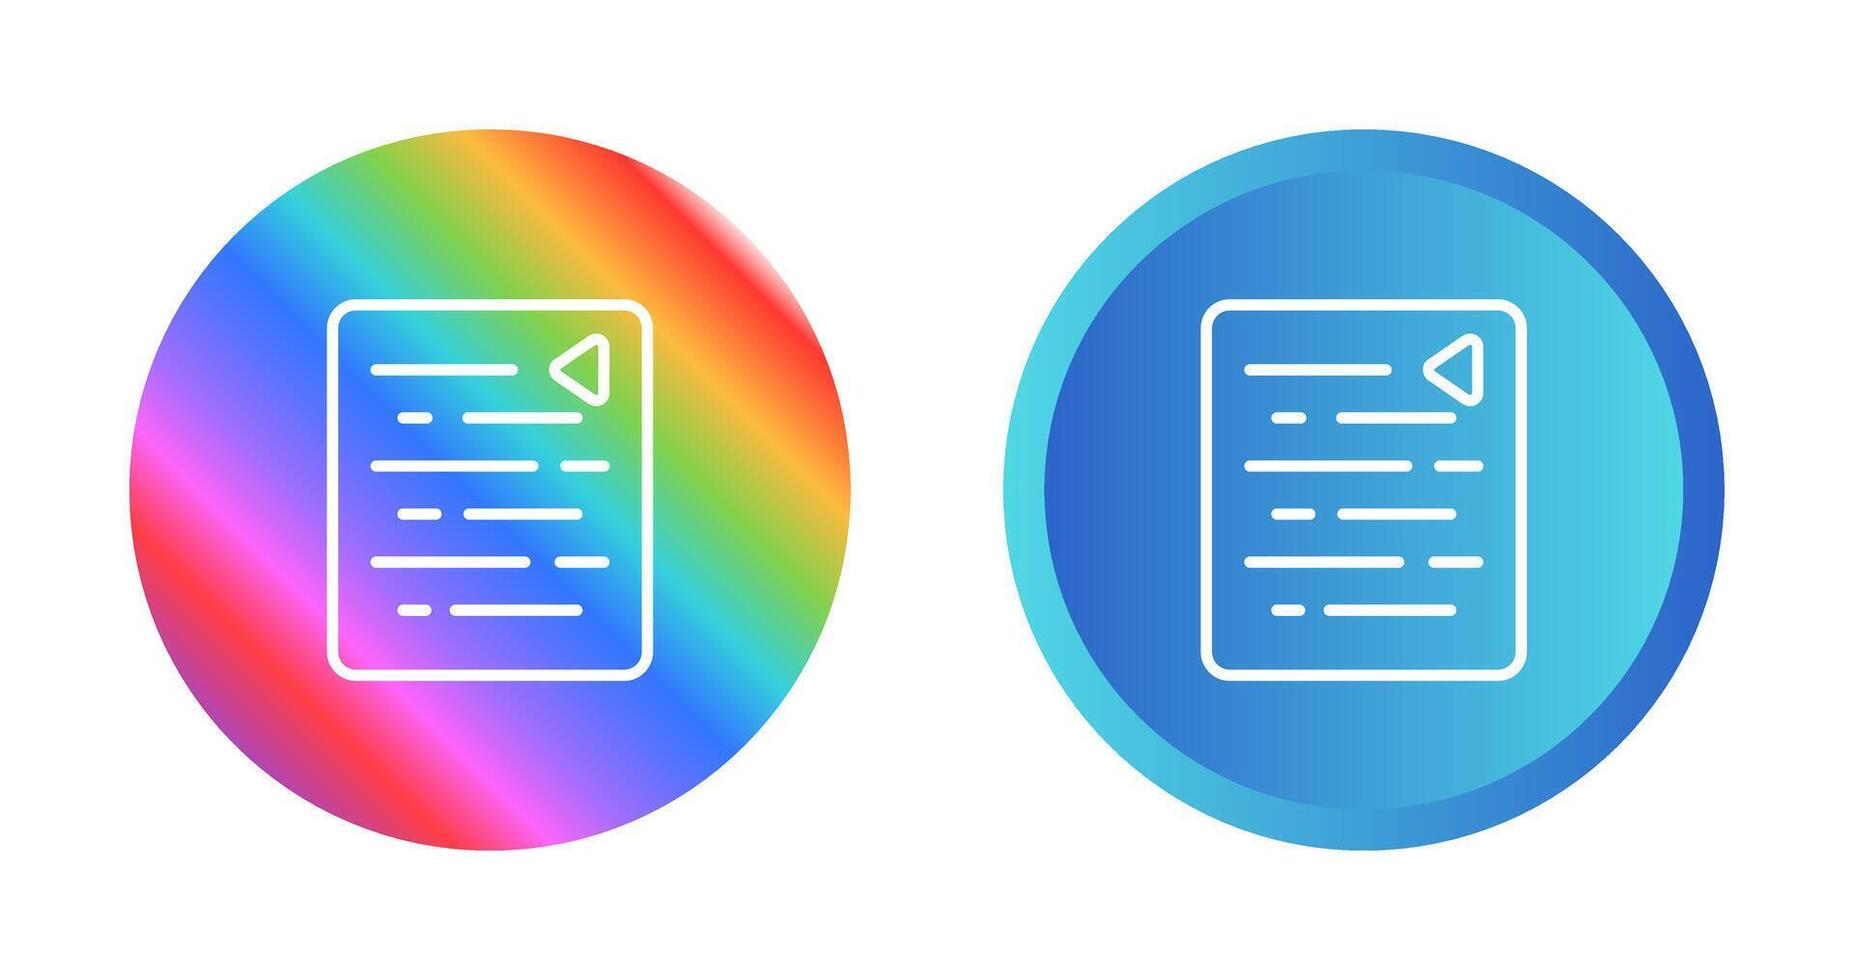 Document Outdent Vector Icon